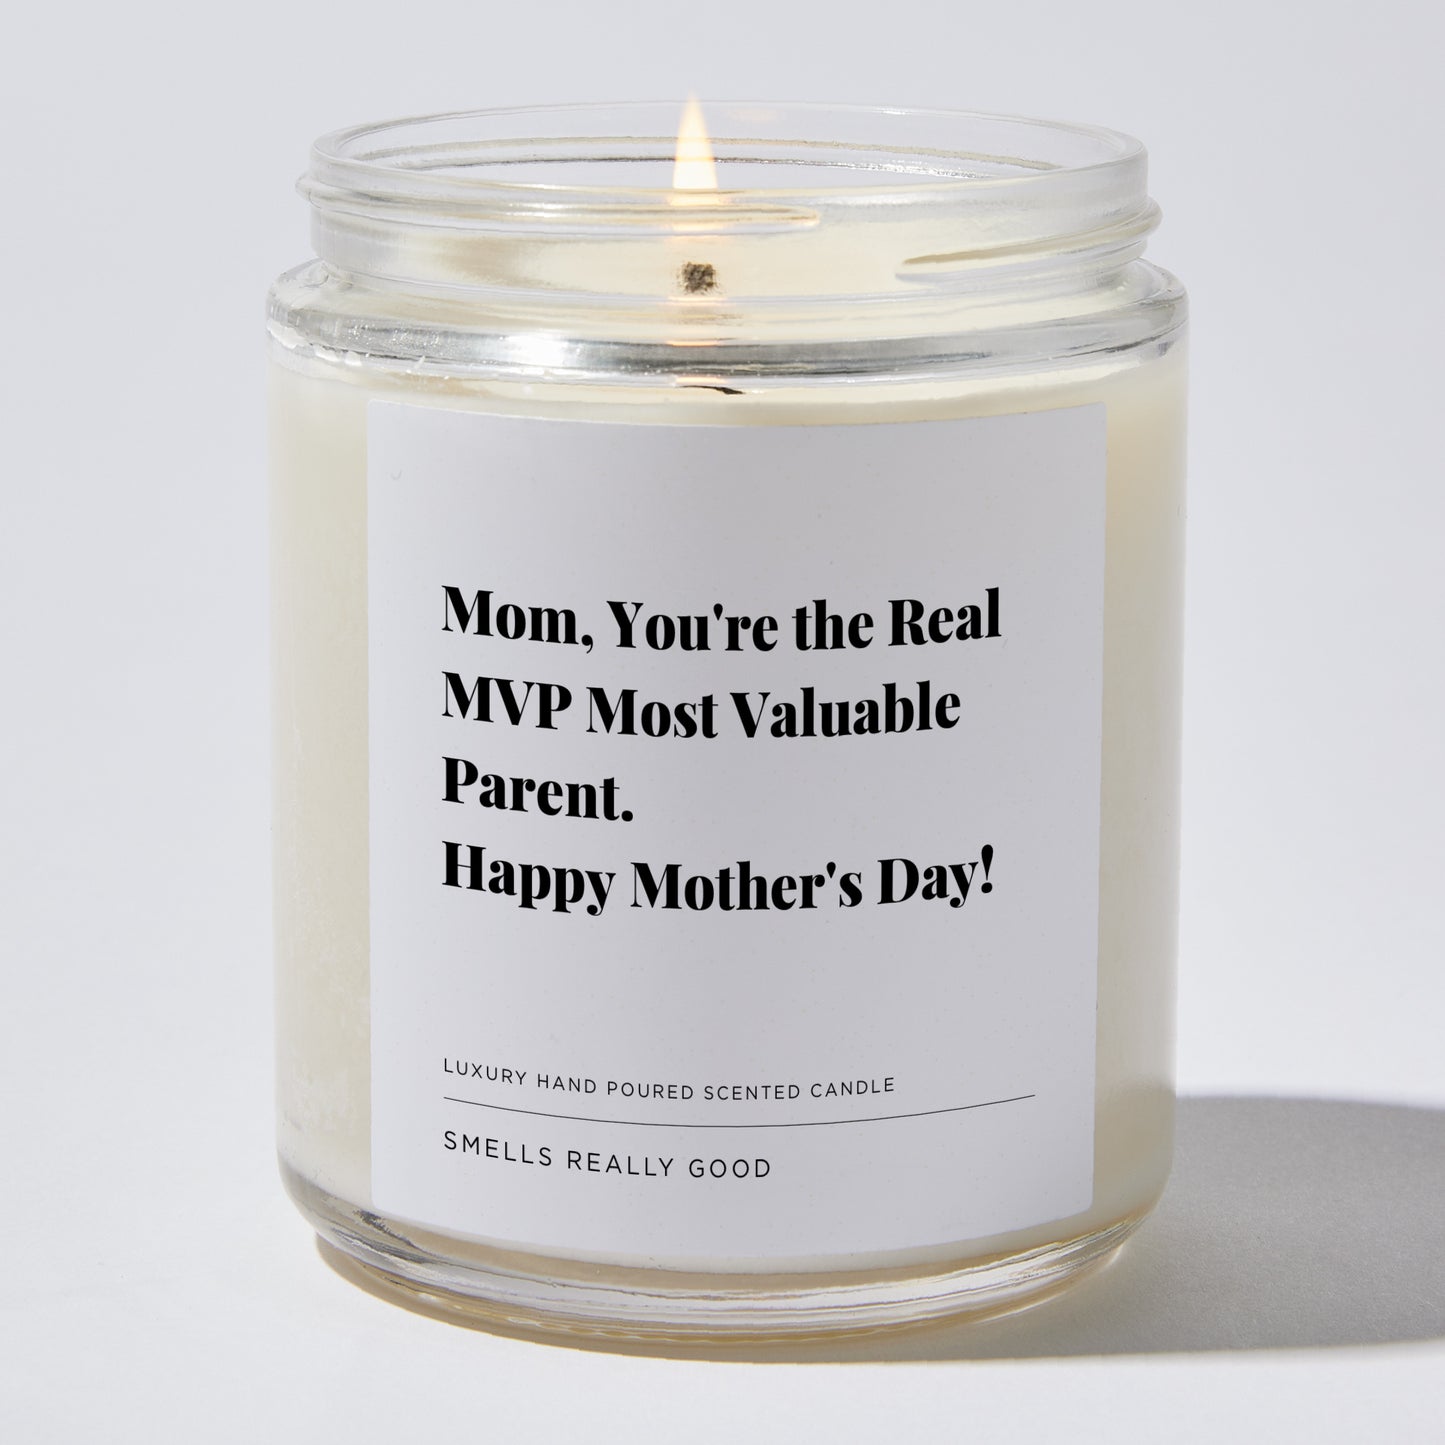 Gift for Mom - Mom, you're the real MVP... Most Valuable Parent. Happy Mother's Day! - Candle